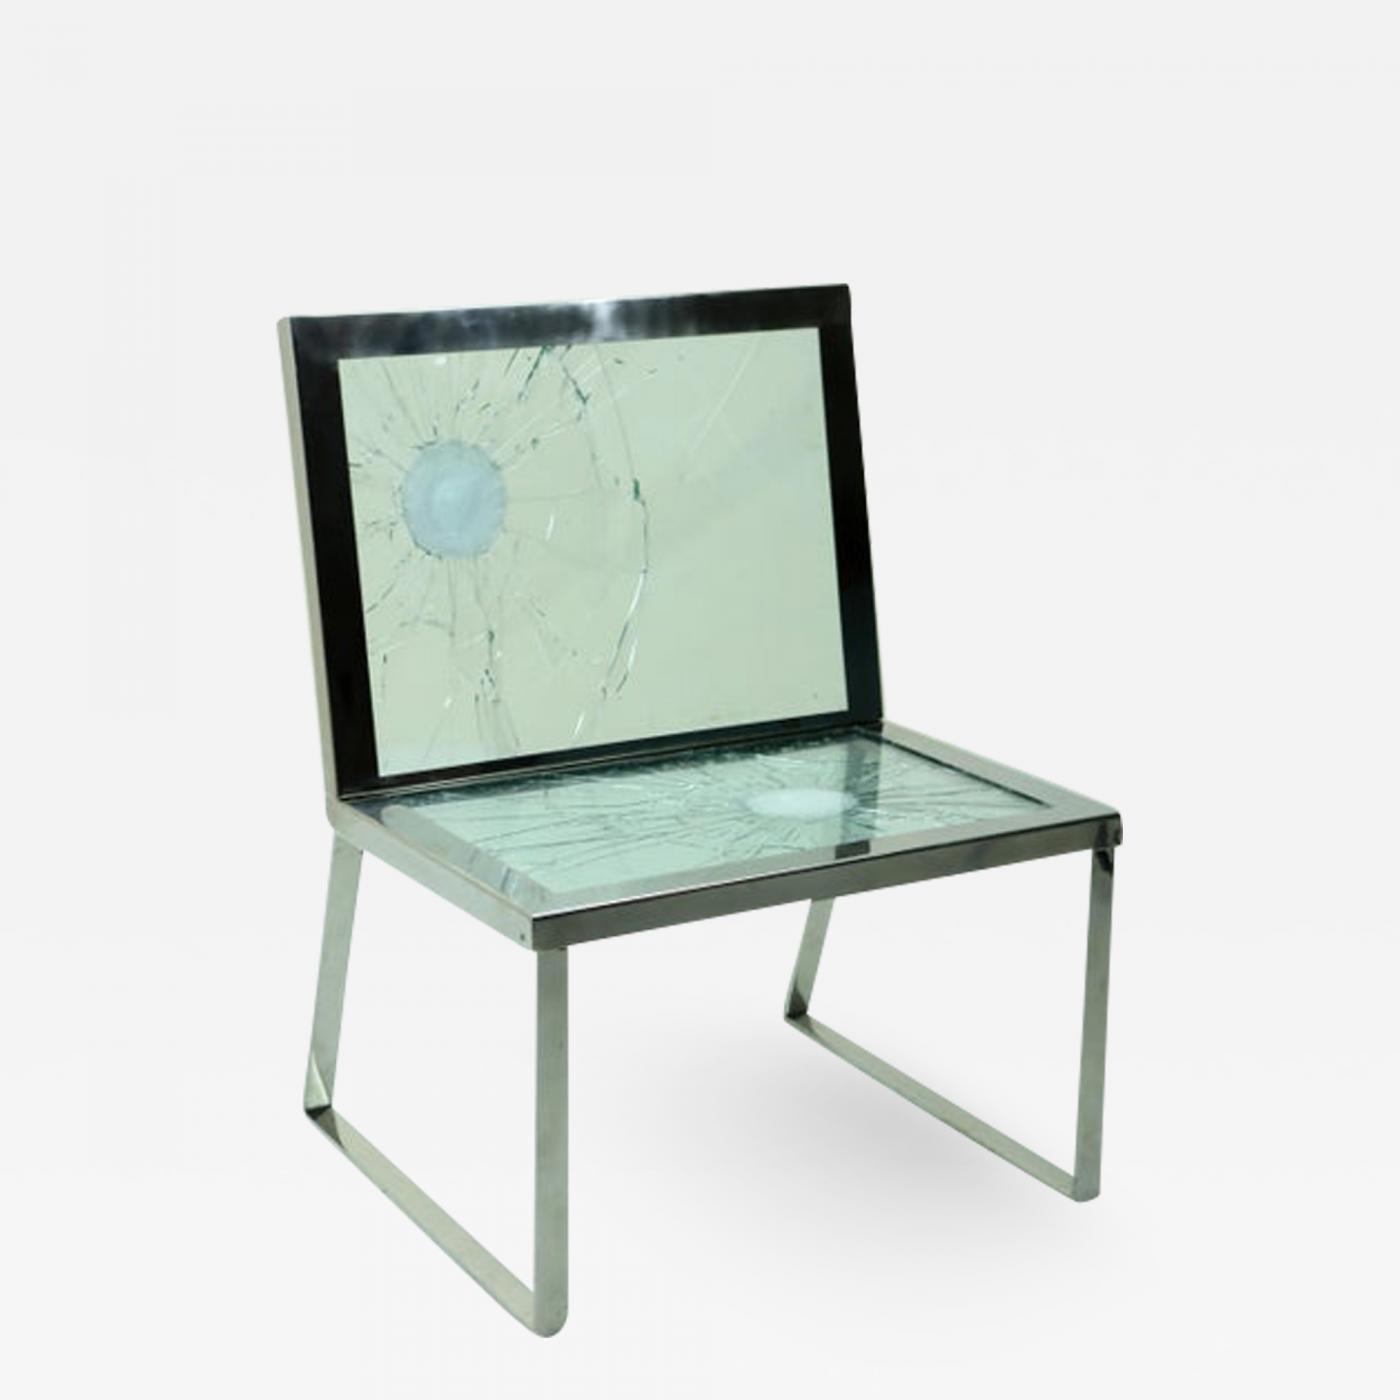 Ale Jordao One Of A Kind Contemporary Bullet Chair By Brazilian